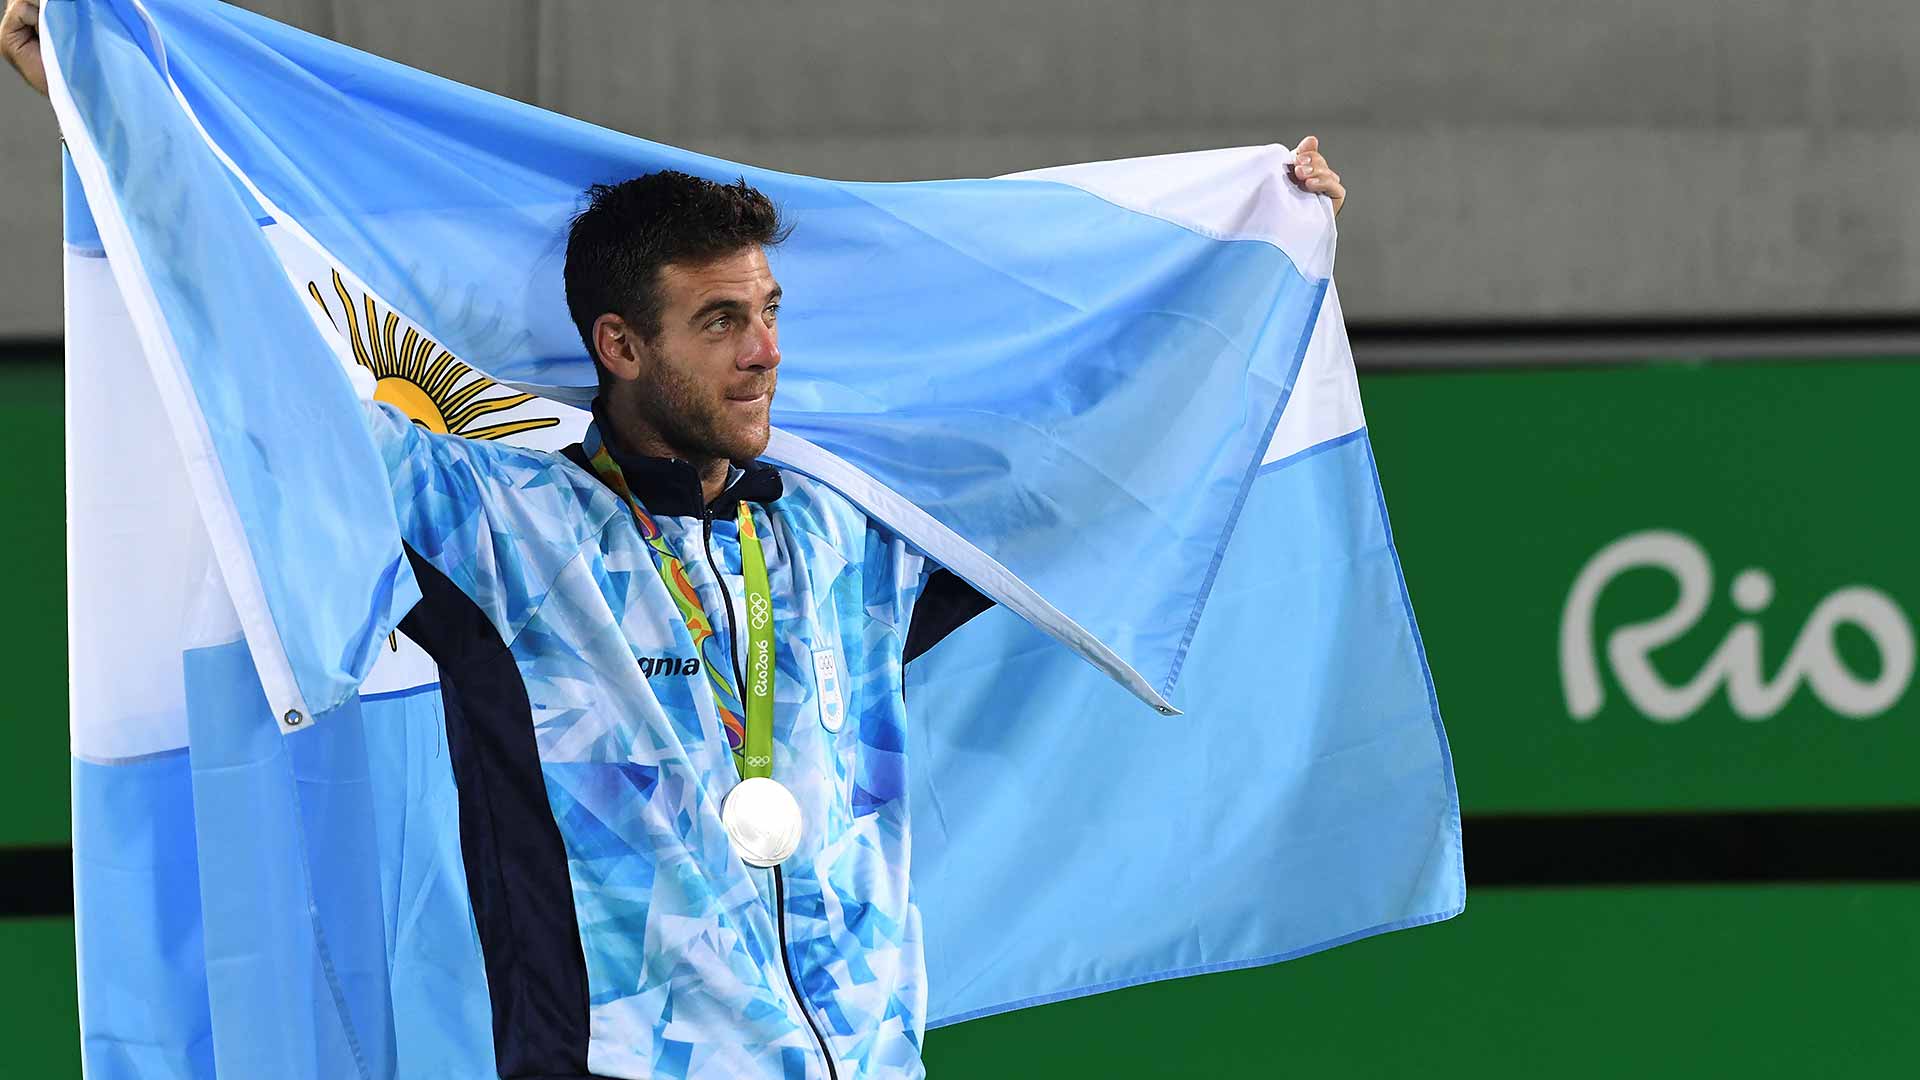 Winning silver at the 2016 Olympics in Rio de Janeiro.